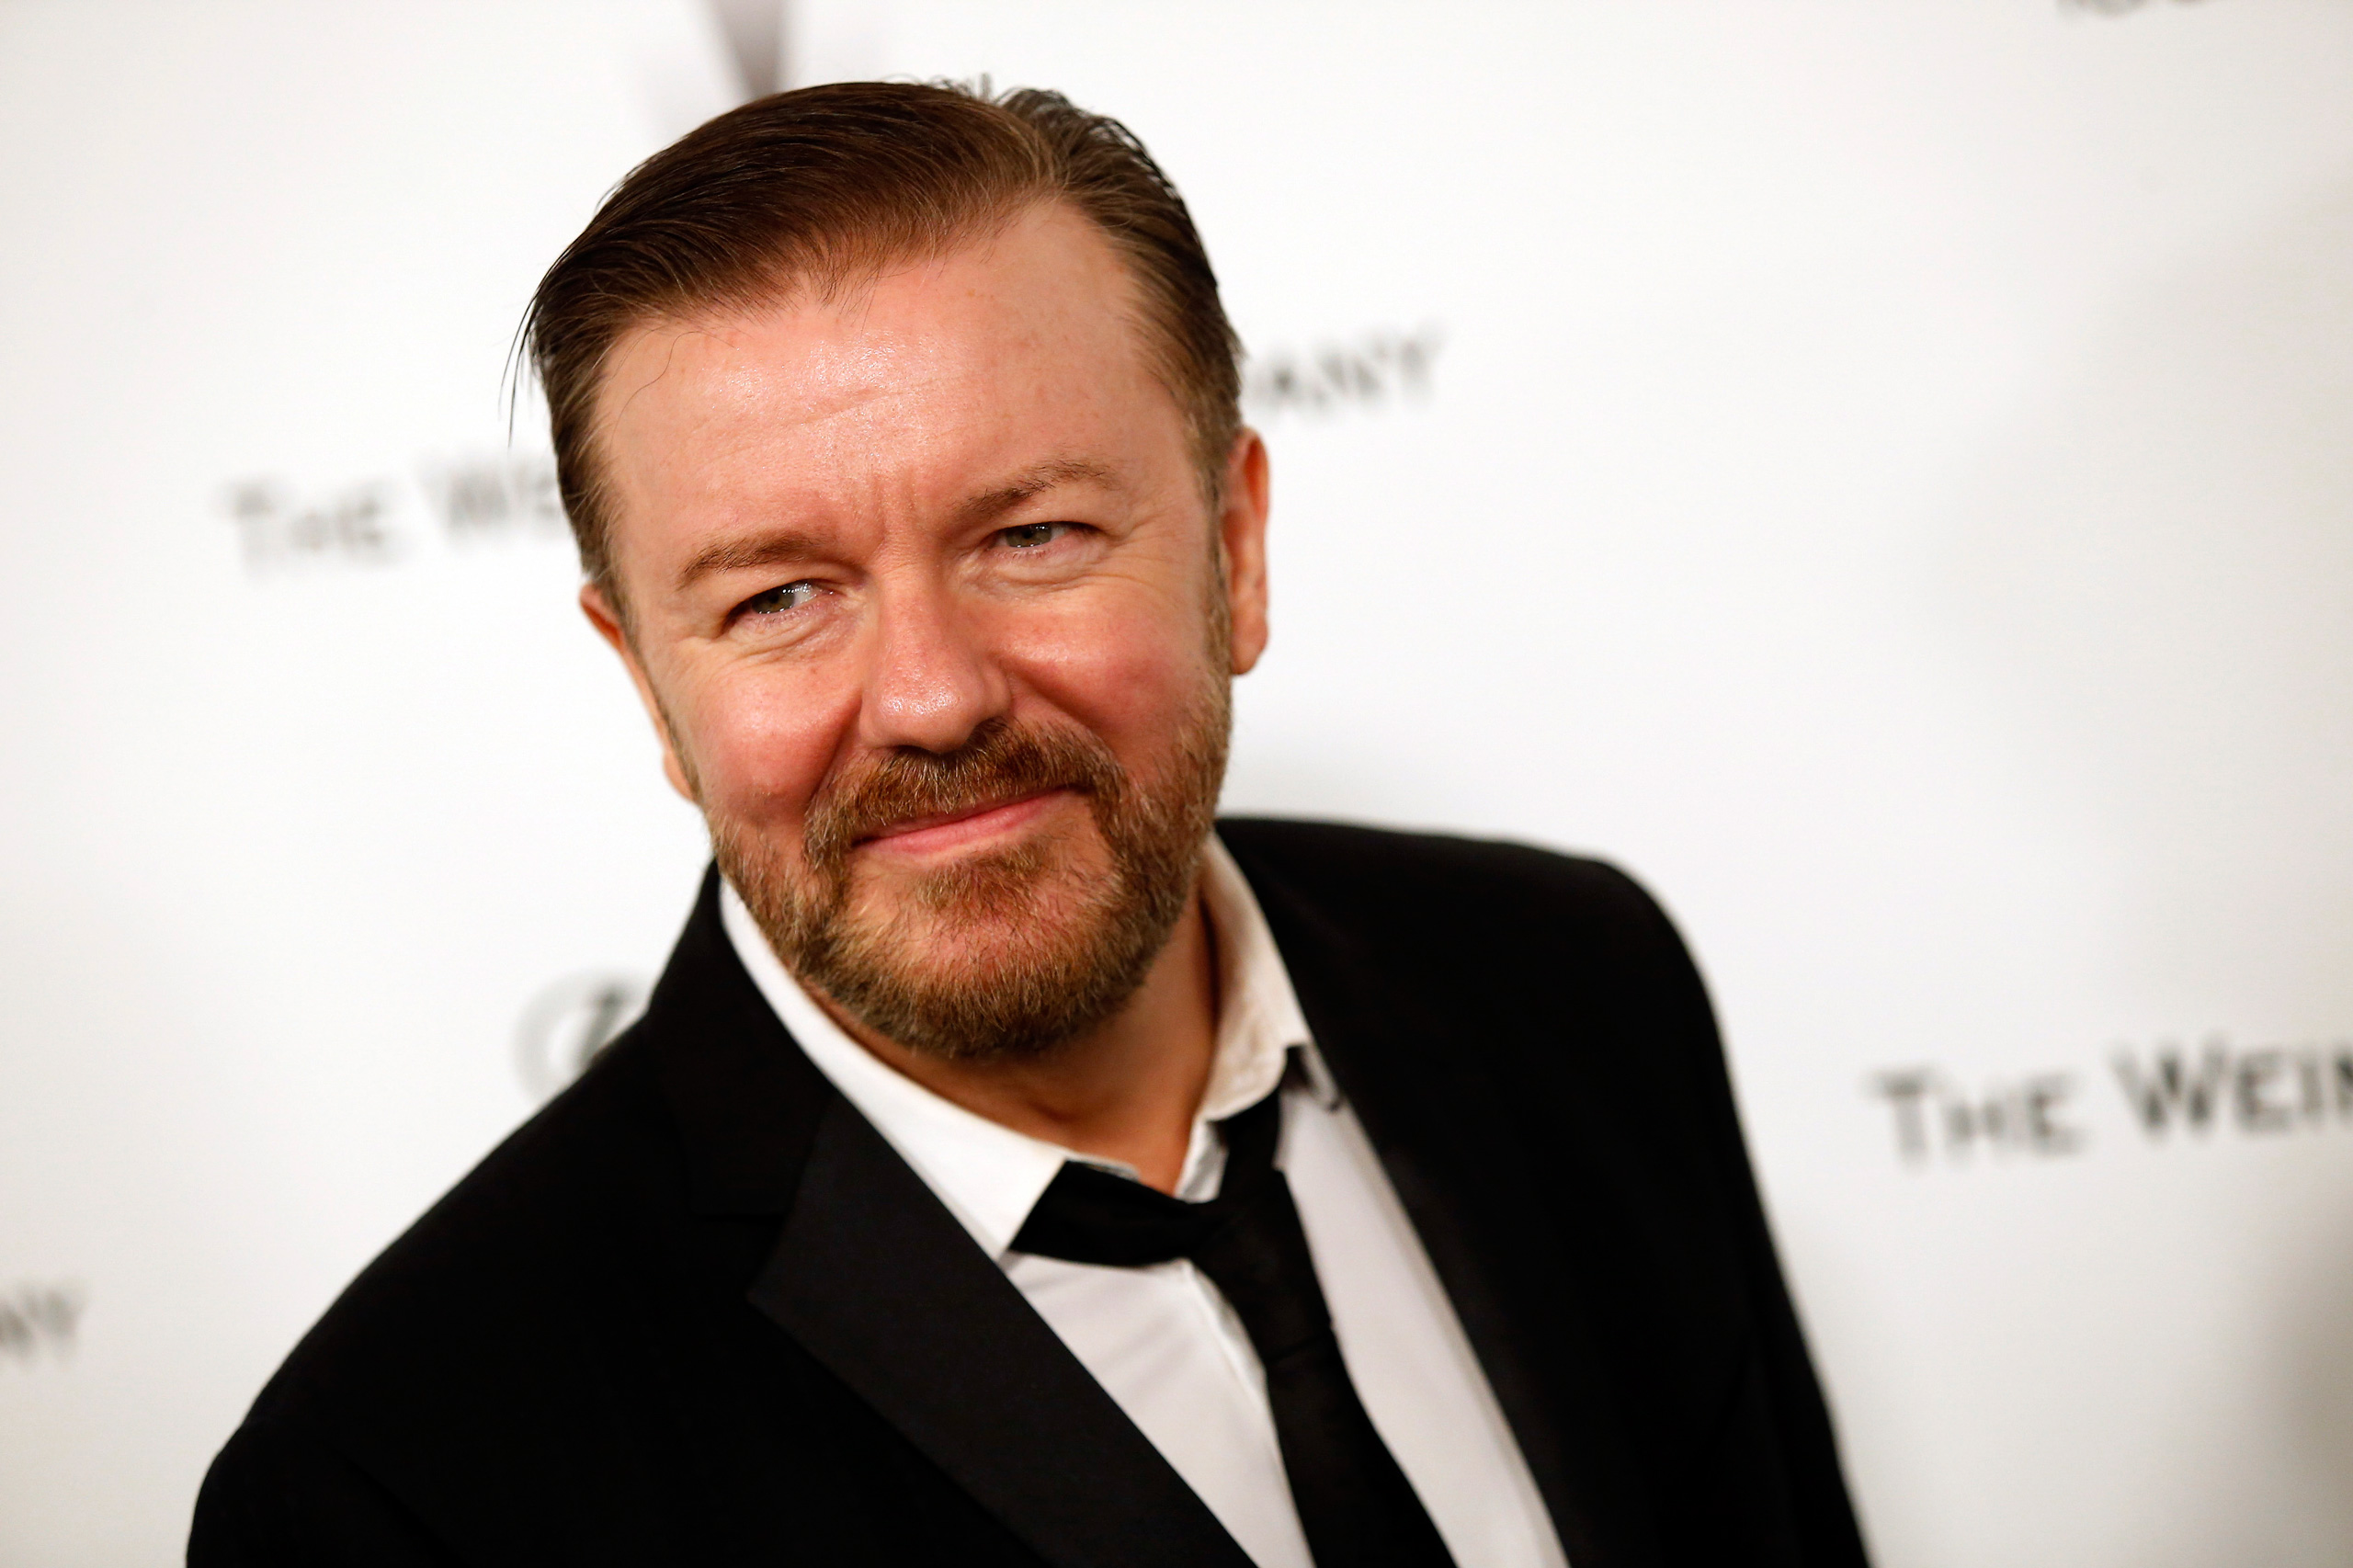 Actor Ricky Gervais arrives at the Weinstein Netflix after party after the 72nd annual Golden Globe Awards in Beverly Hills on Jan. 11, 2015. (Patrick Fallon—Reuters)